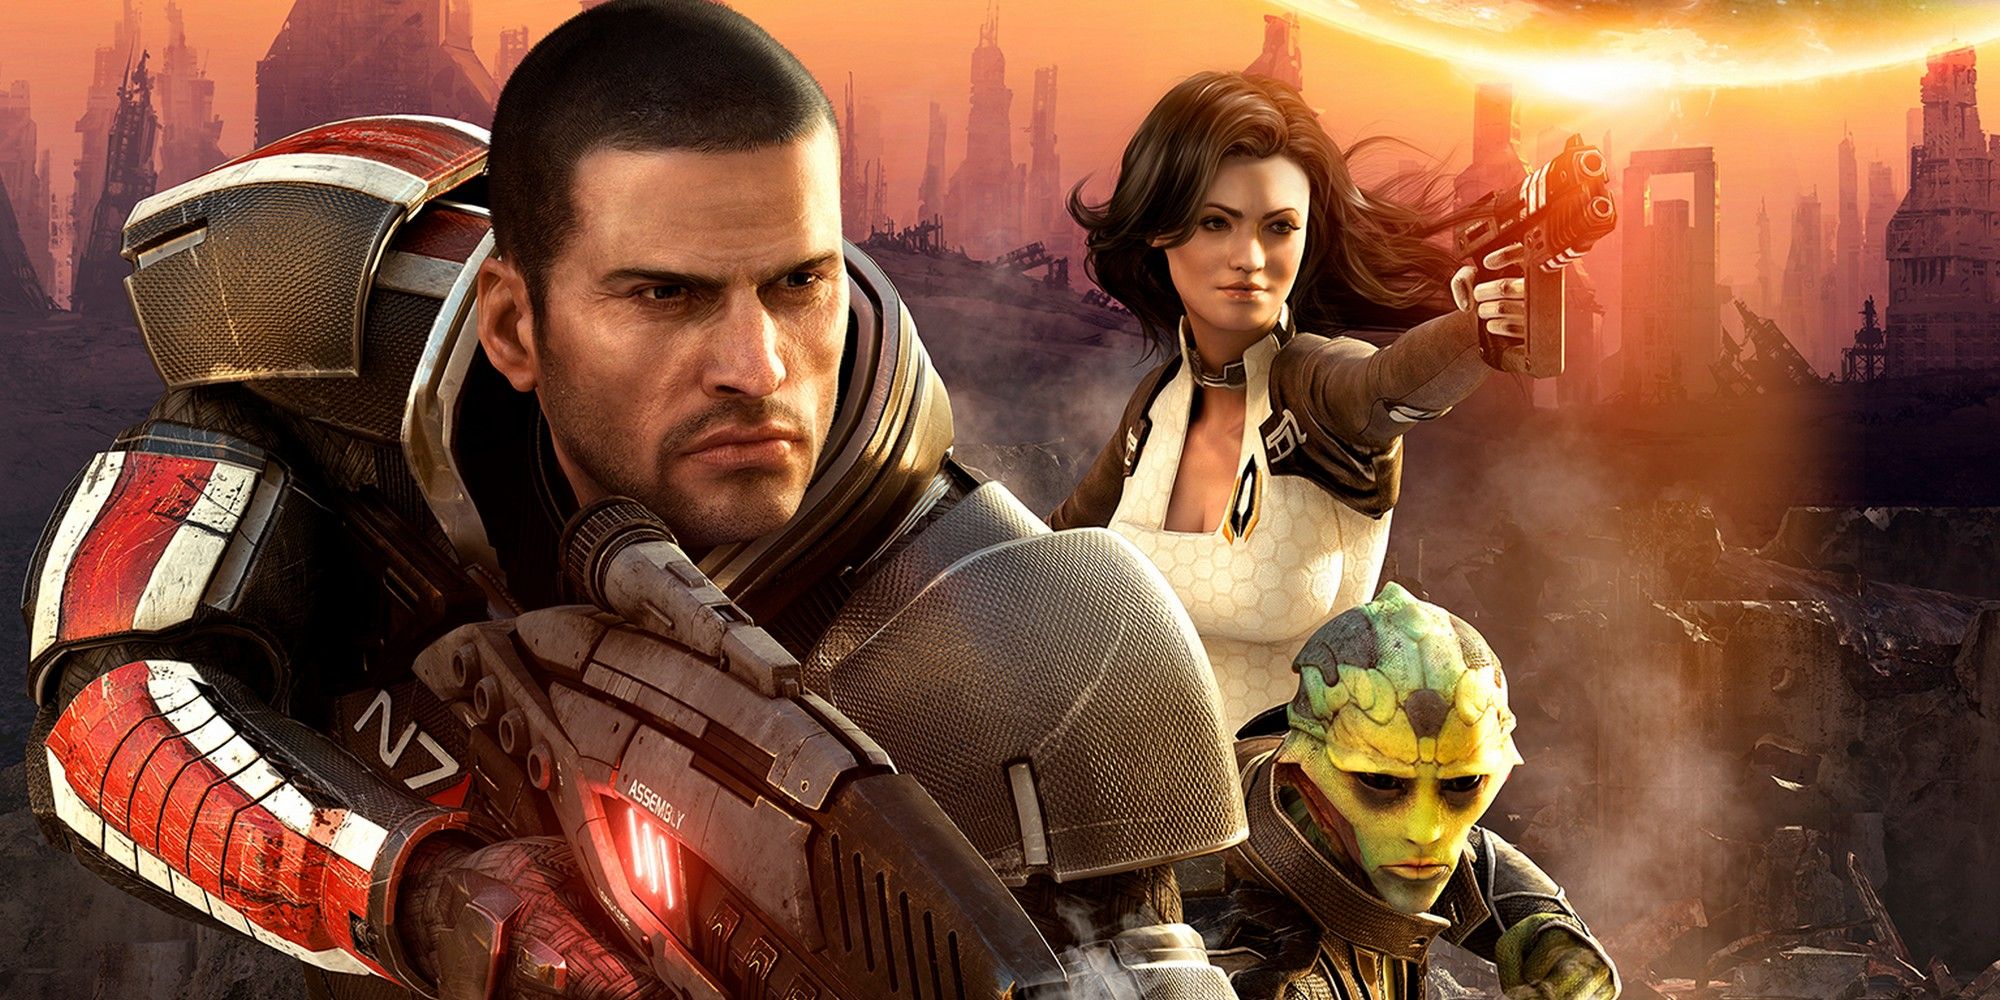 Mass Effect 2 Commander Shepard and co in front of the ruins of a city in the game